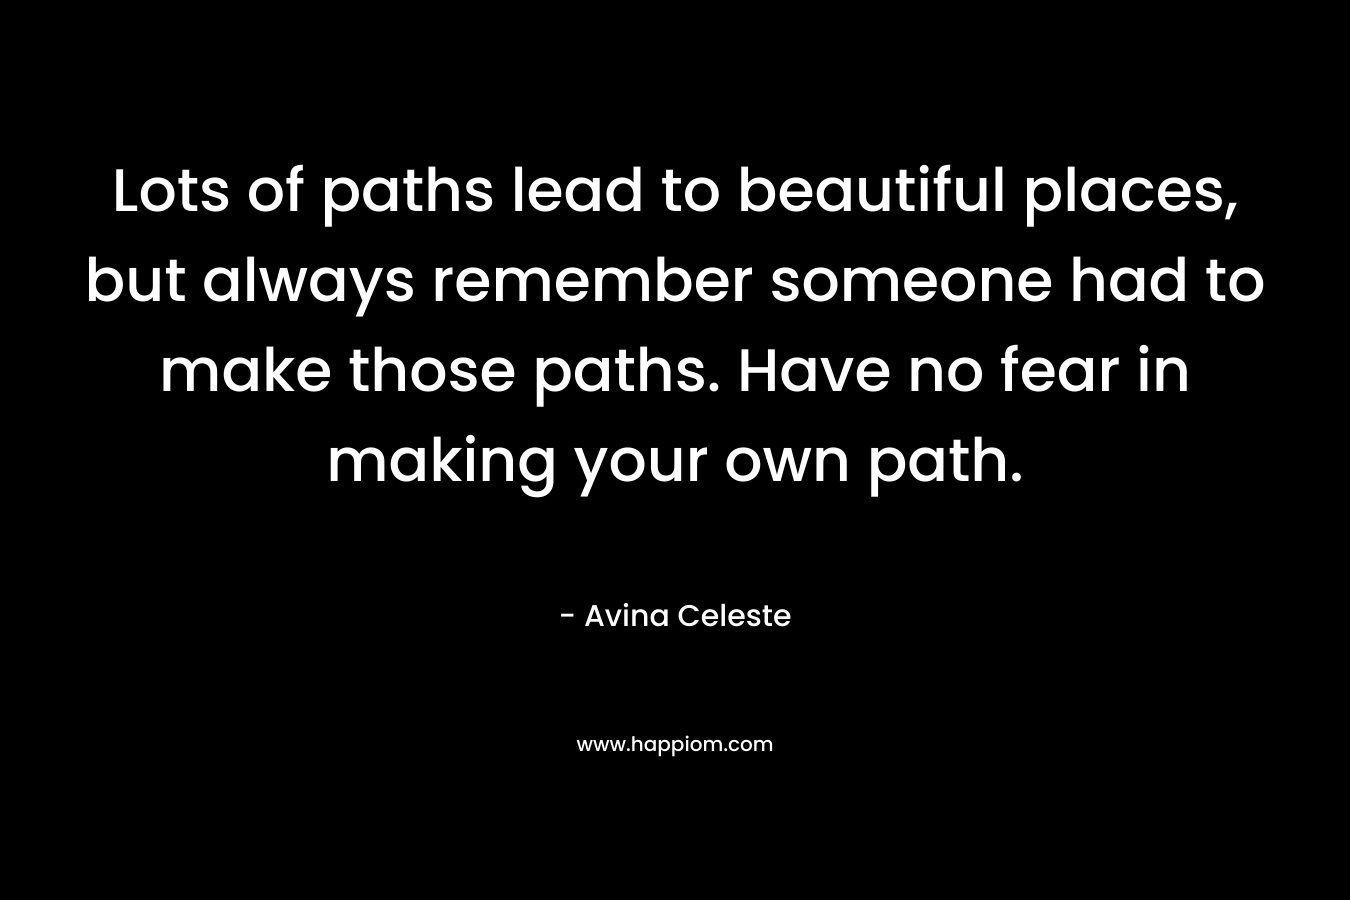 Lots of paths lead to beautiful places, but always remember someone had to make those paths. Have no fear in making your own path.